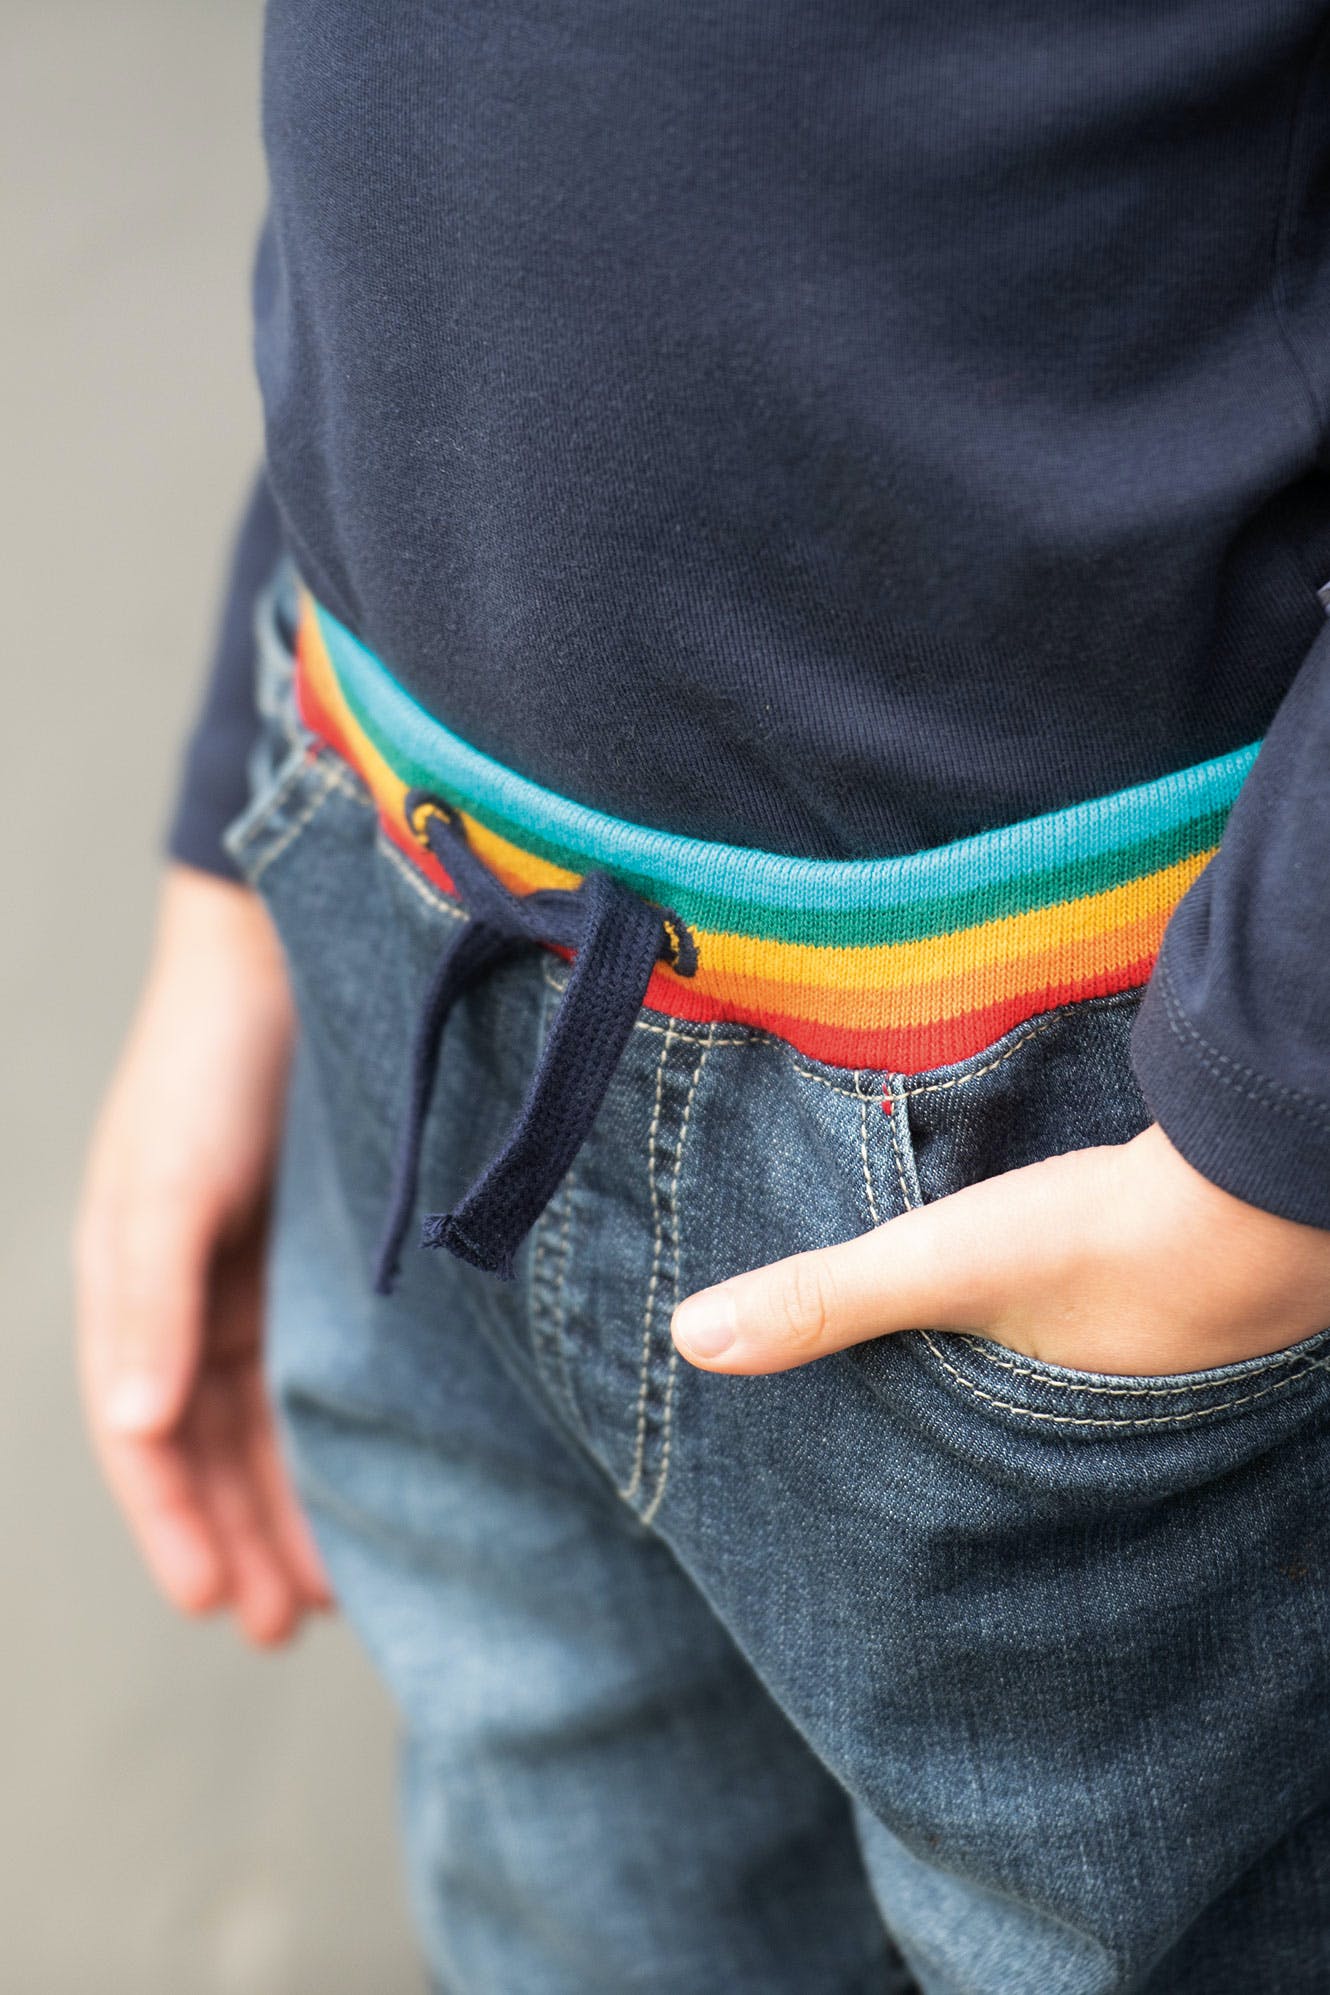 Frugi Cody Comfy Jeans-Kids-Ohh! By Gum - Shop Sustainable